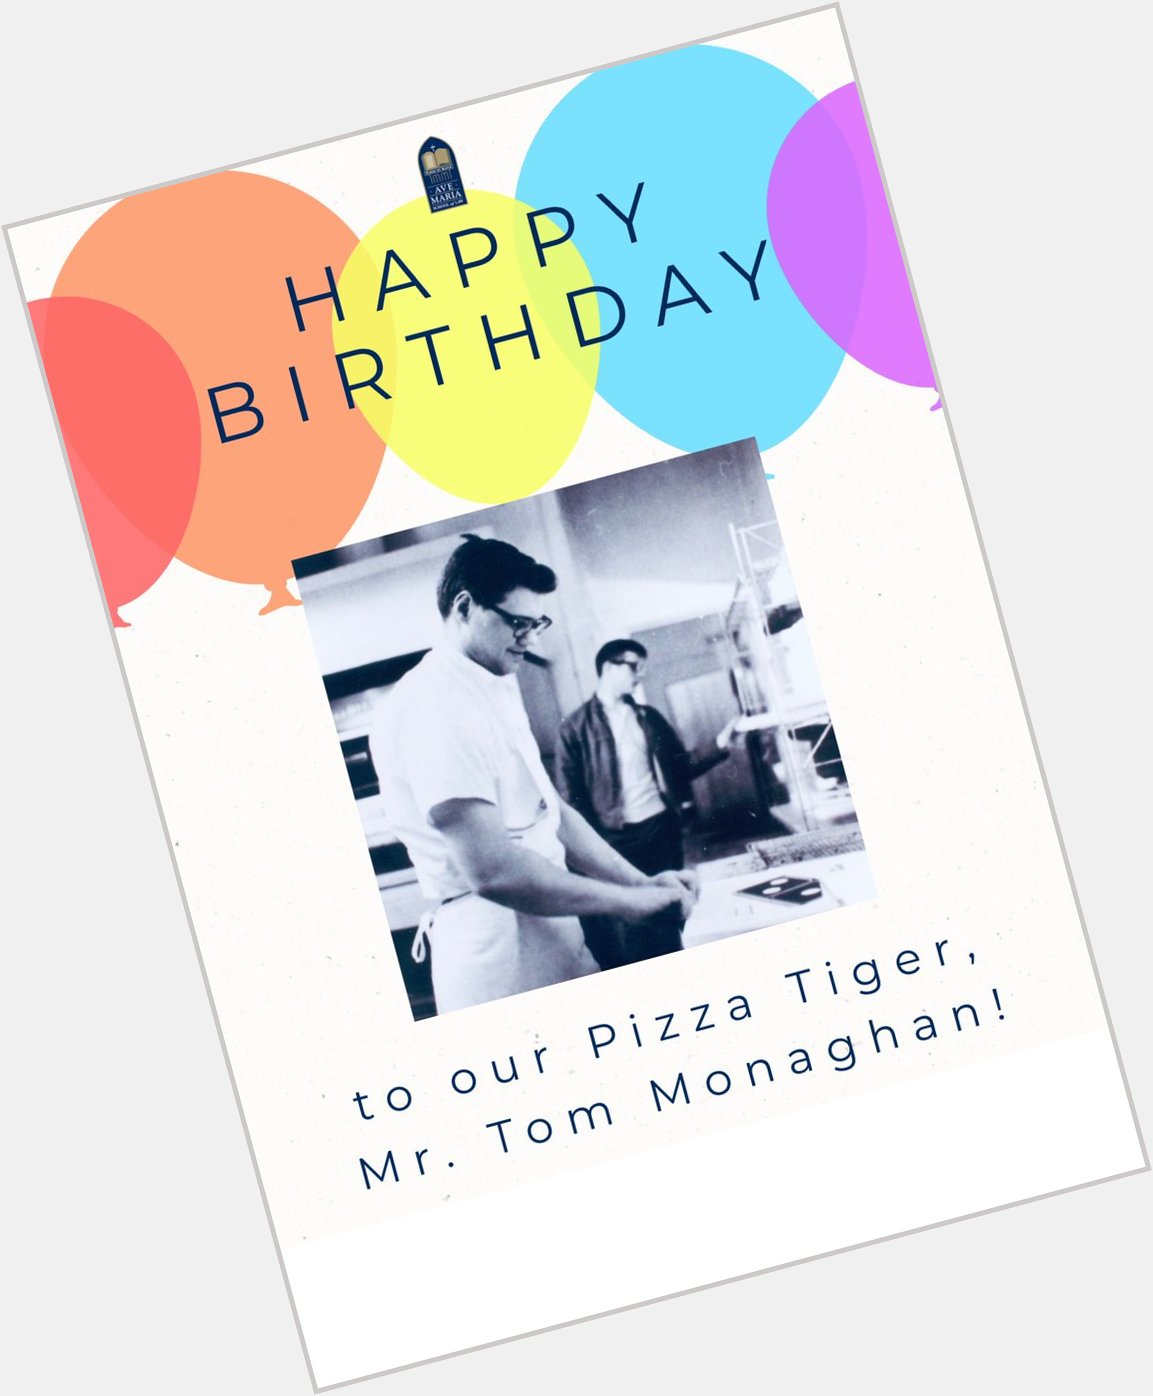 Happy birthday to our founder, Mr. Tom Monaghan!  